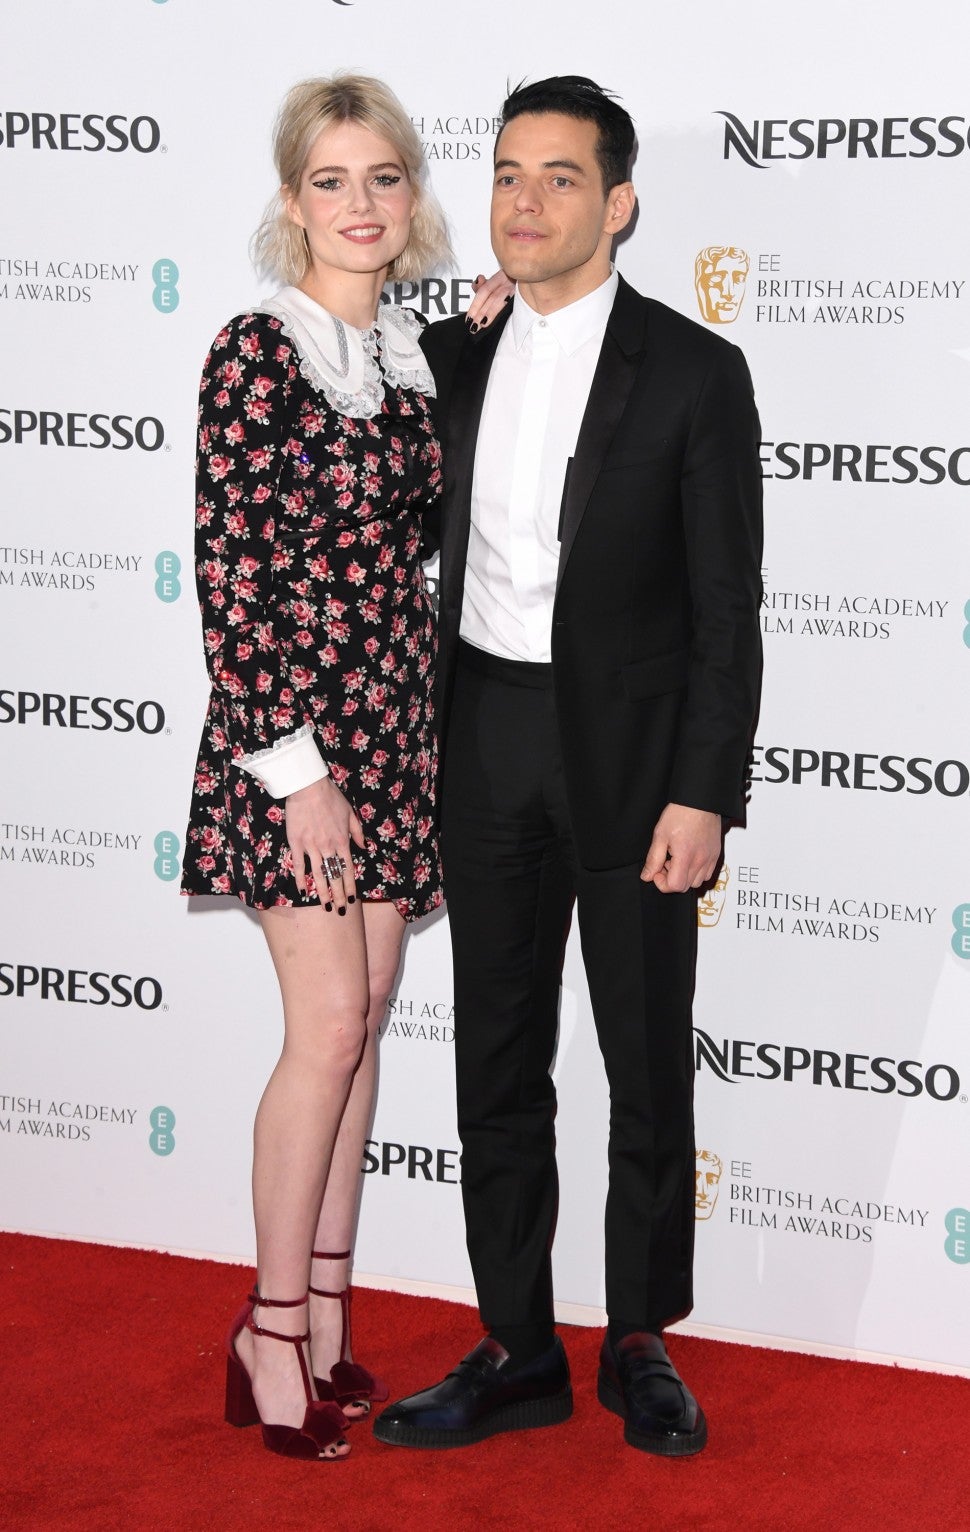 Lucy Boynton and Rami Malek attend the Nespresso British Academy Film Awards nominees party at Kensington Palace on February 9, 2019 in London, England.